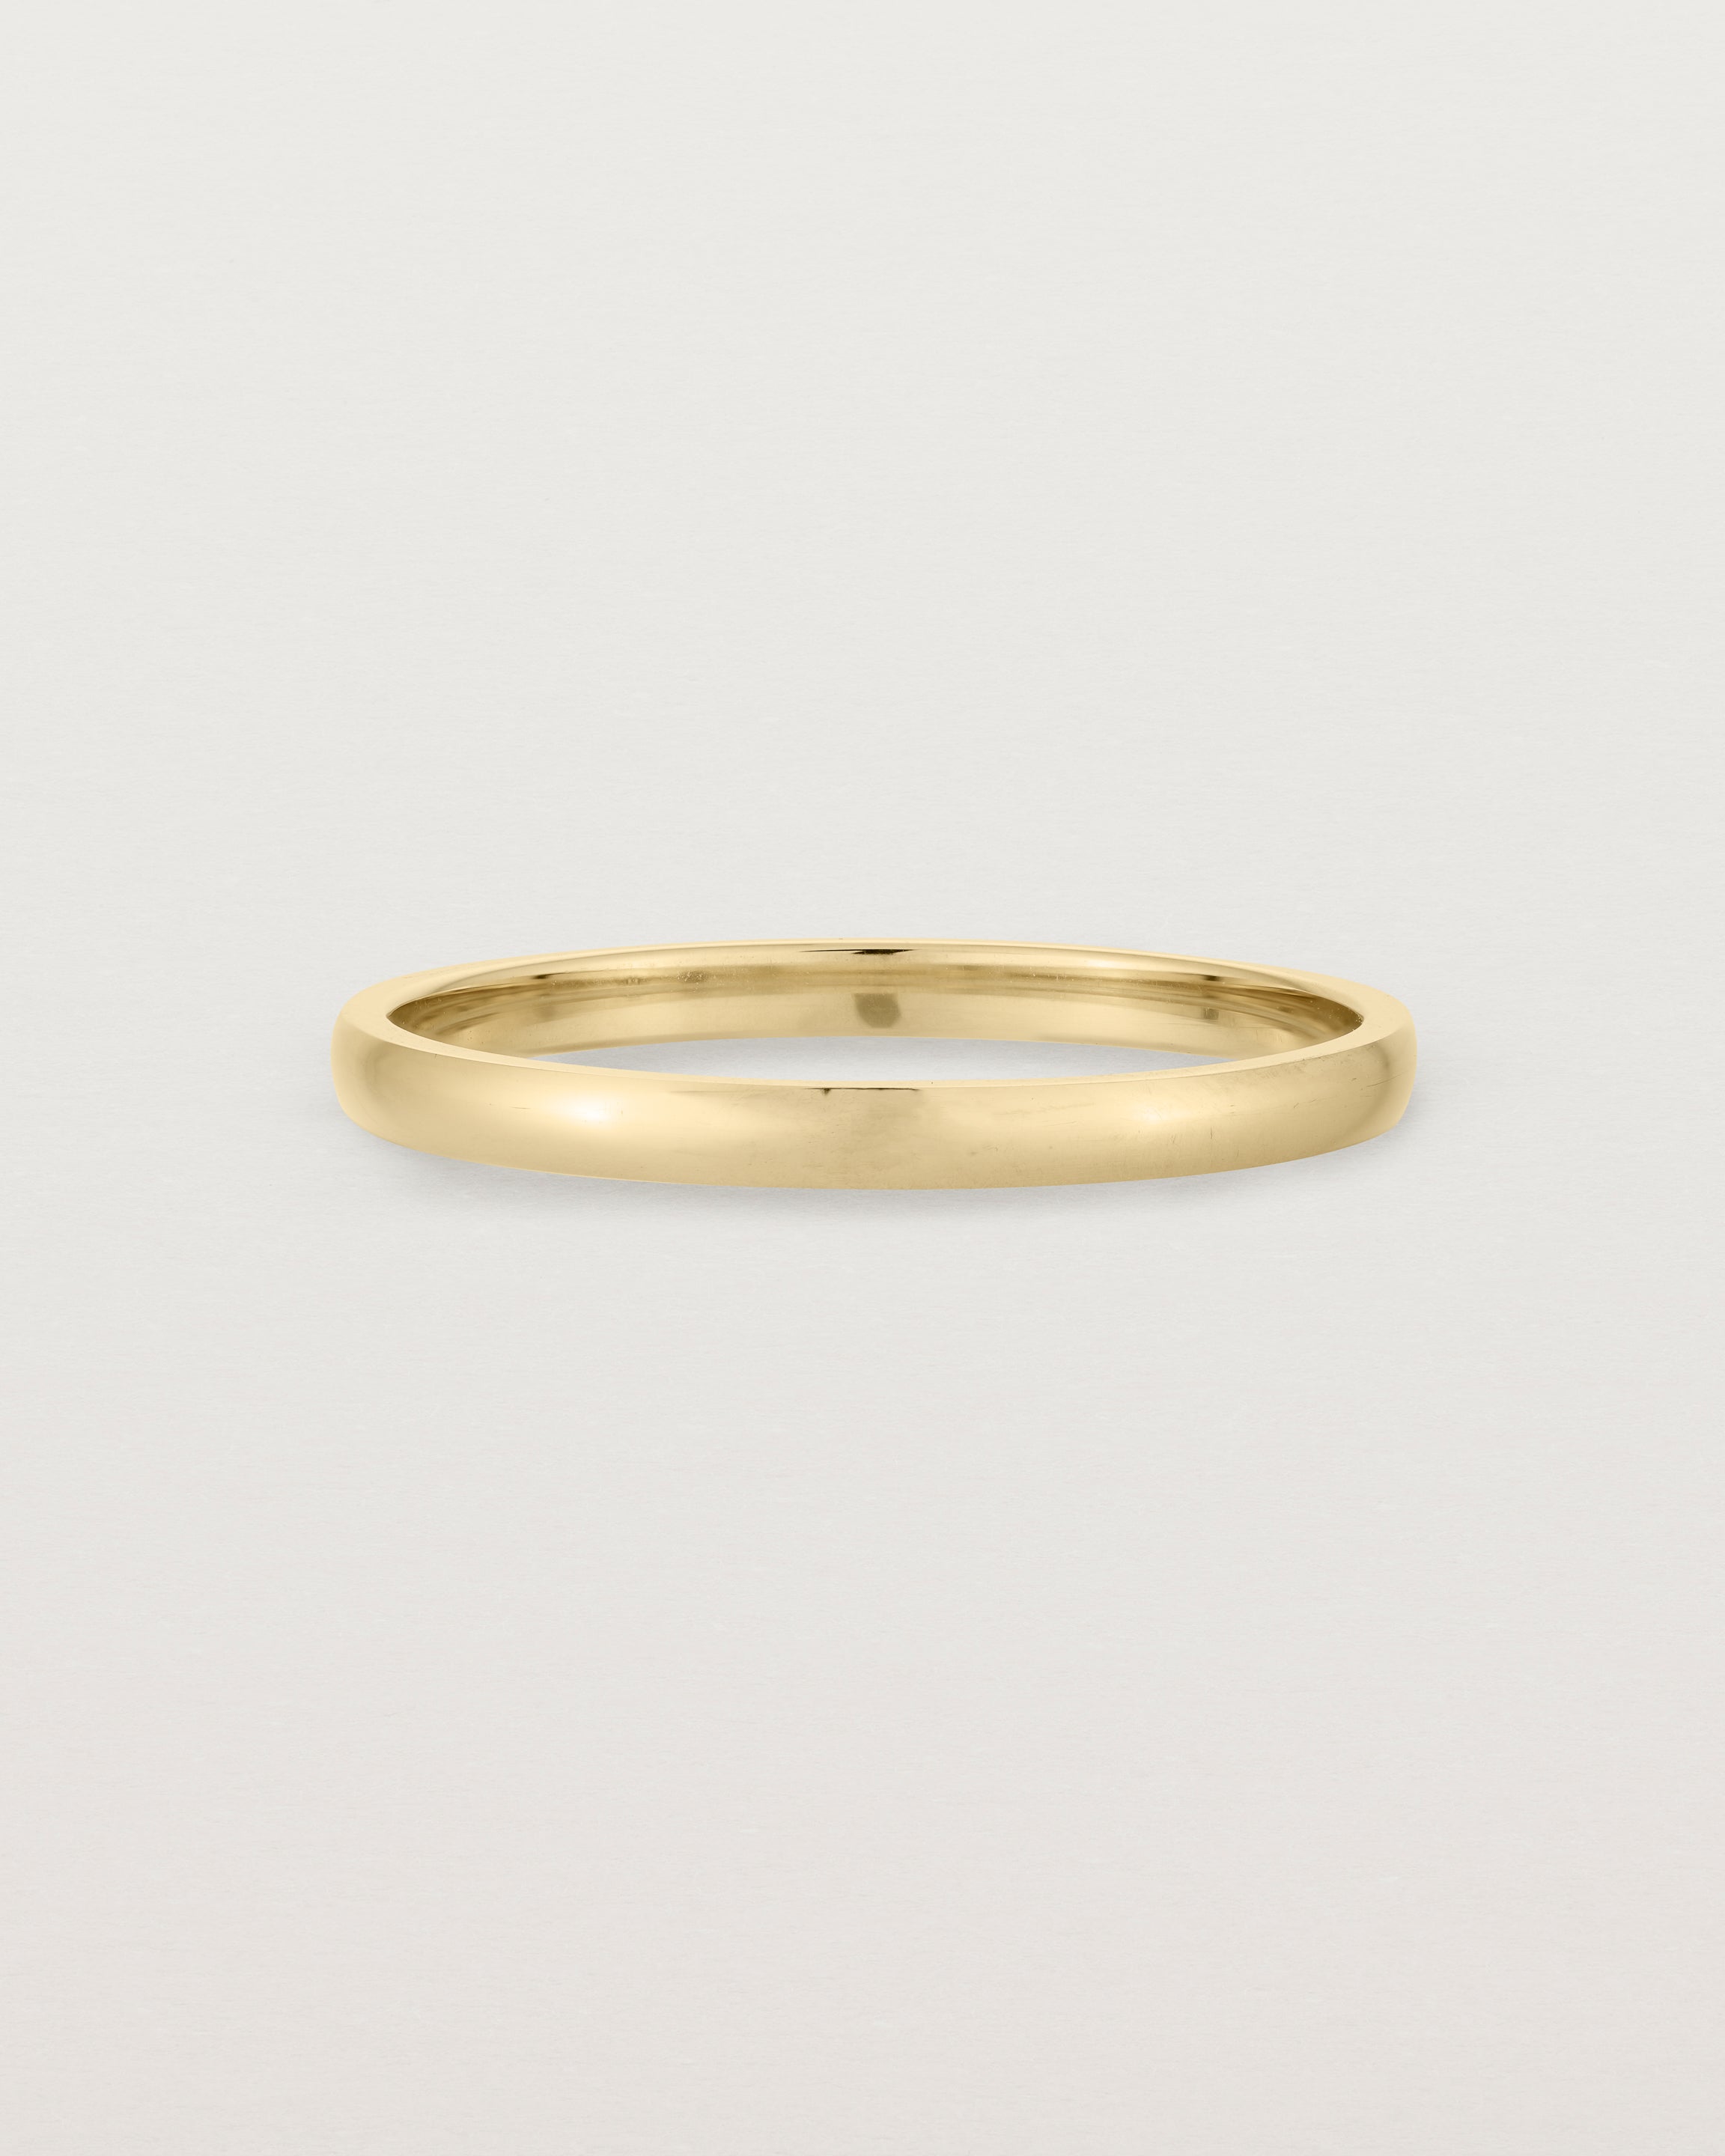 A fine, classic wedding band in yellow gold